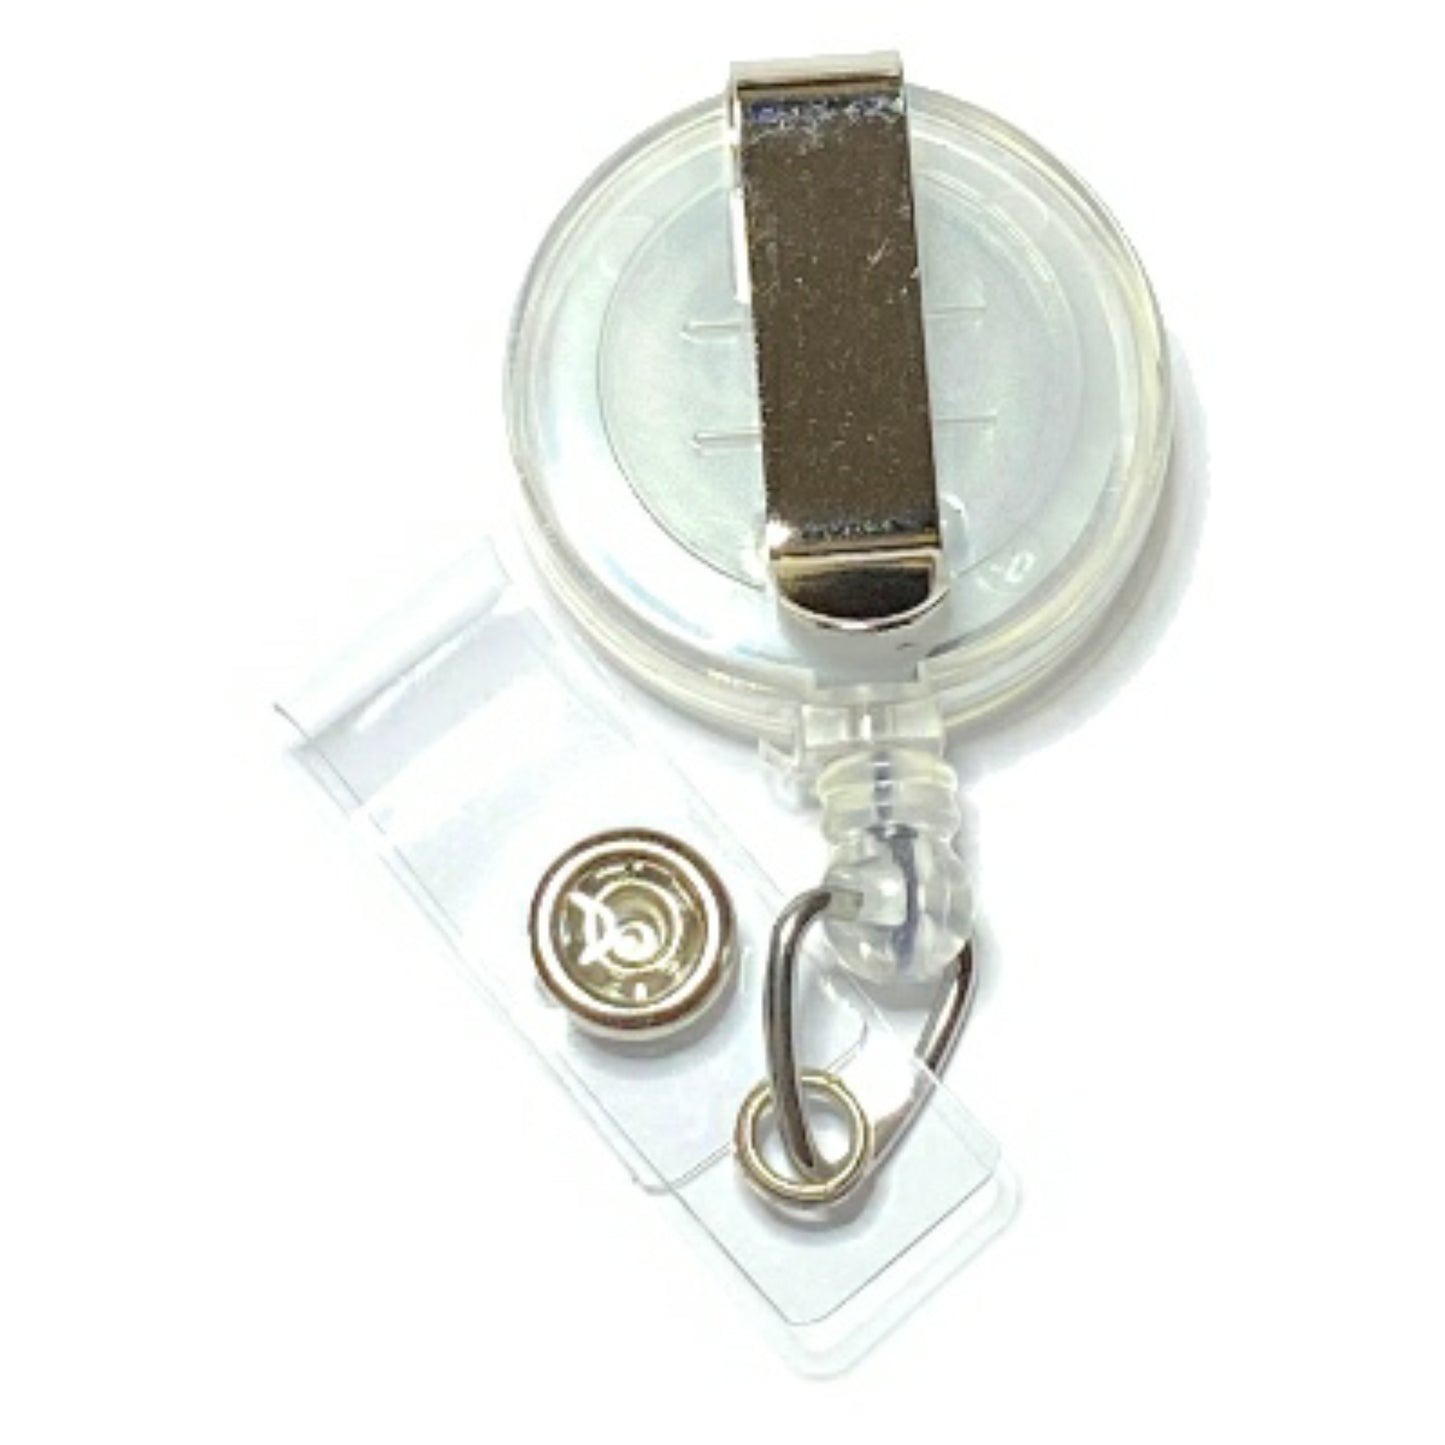 In Christ Alone My Hope is Found Retractable ID Badge Reel Holder